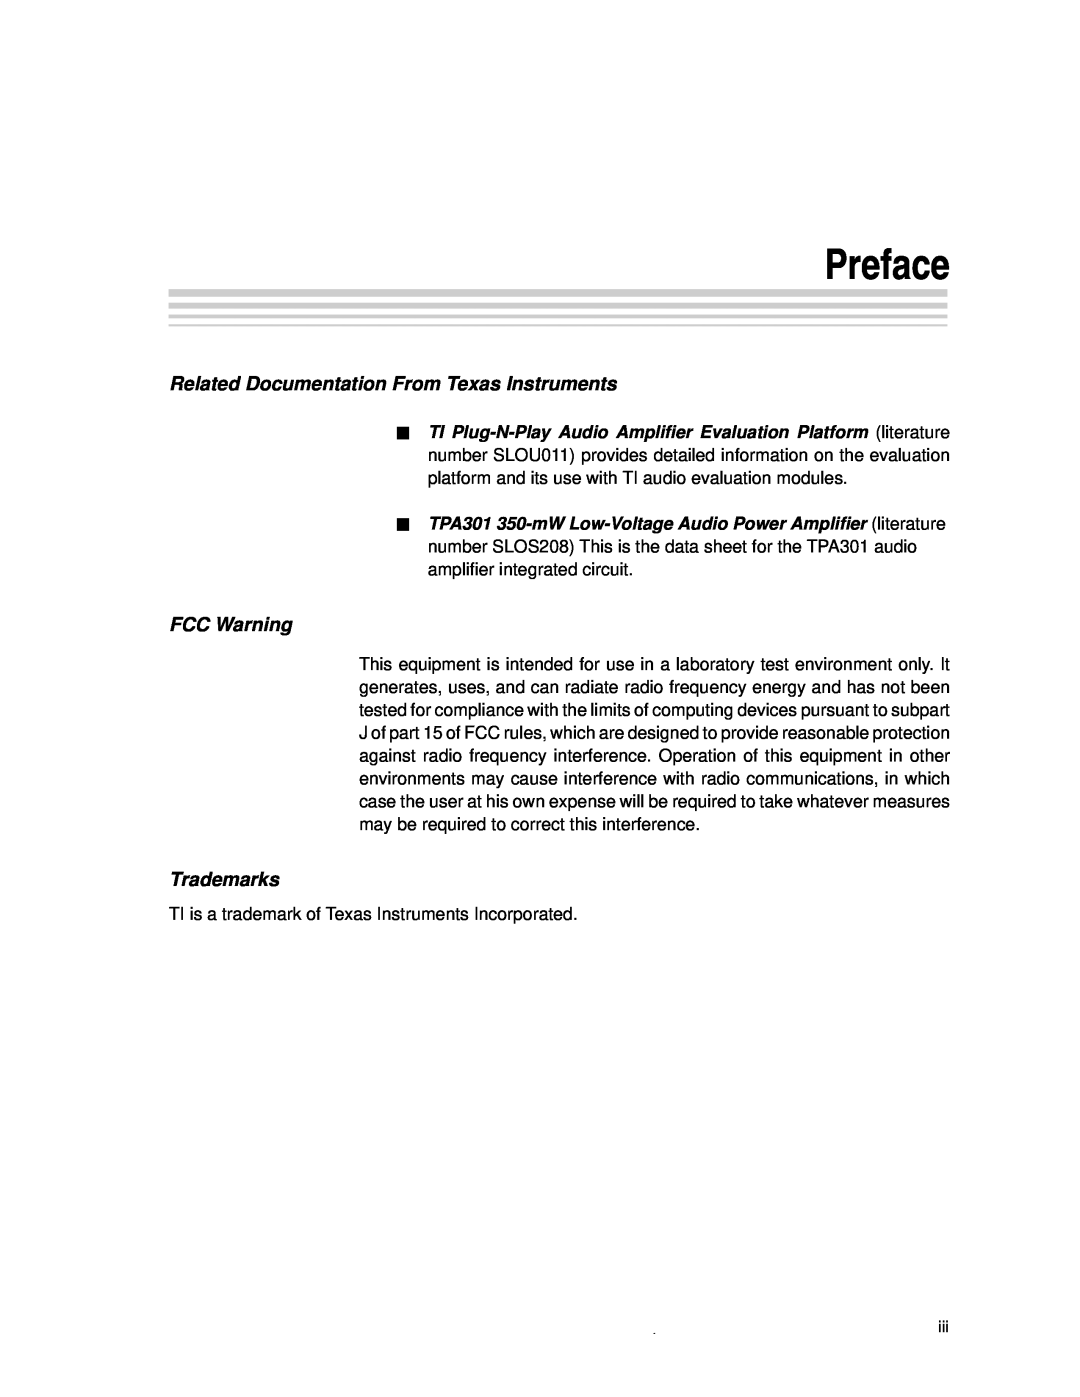 Texas Instruments TPA301 manual Preface, Related Documentation FromJTexas Instruments, FCC Warning, Trademarks 